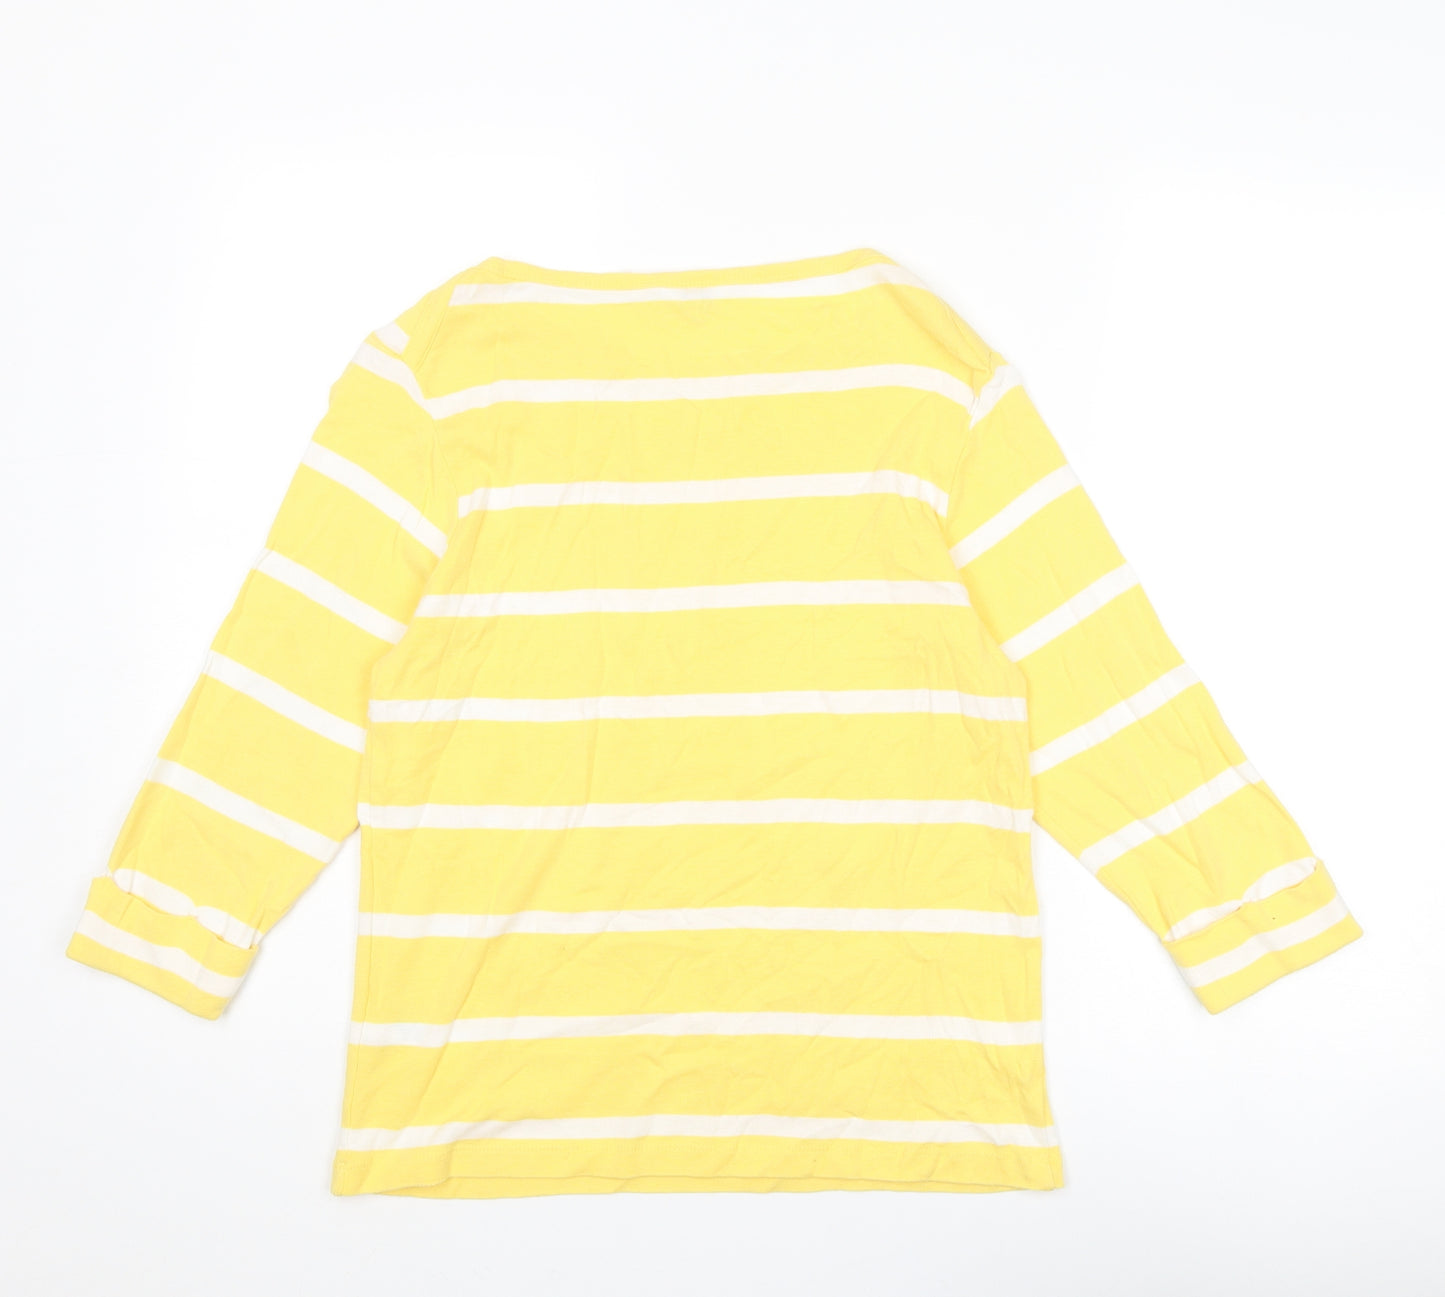 Cotton Traders Womens Yellow Striped Cotton Basic Blouse Size 16 Round Neck